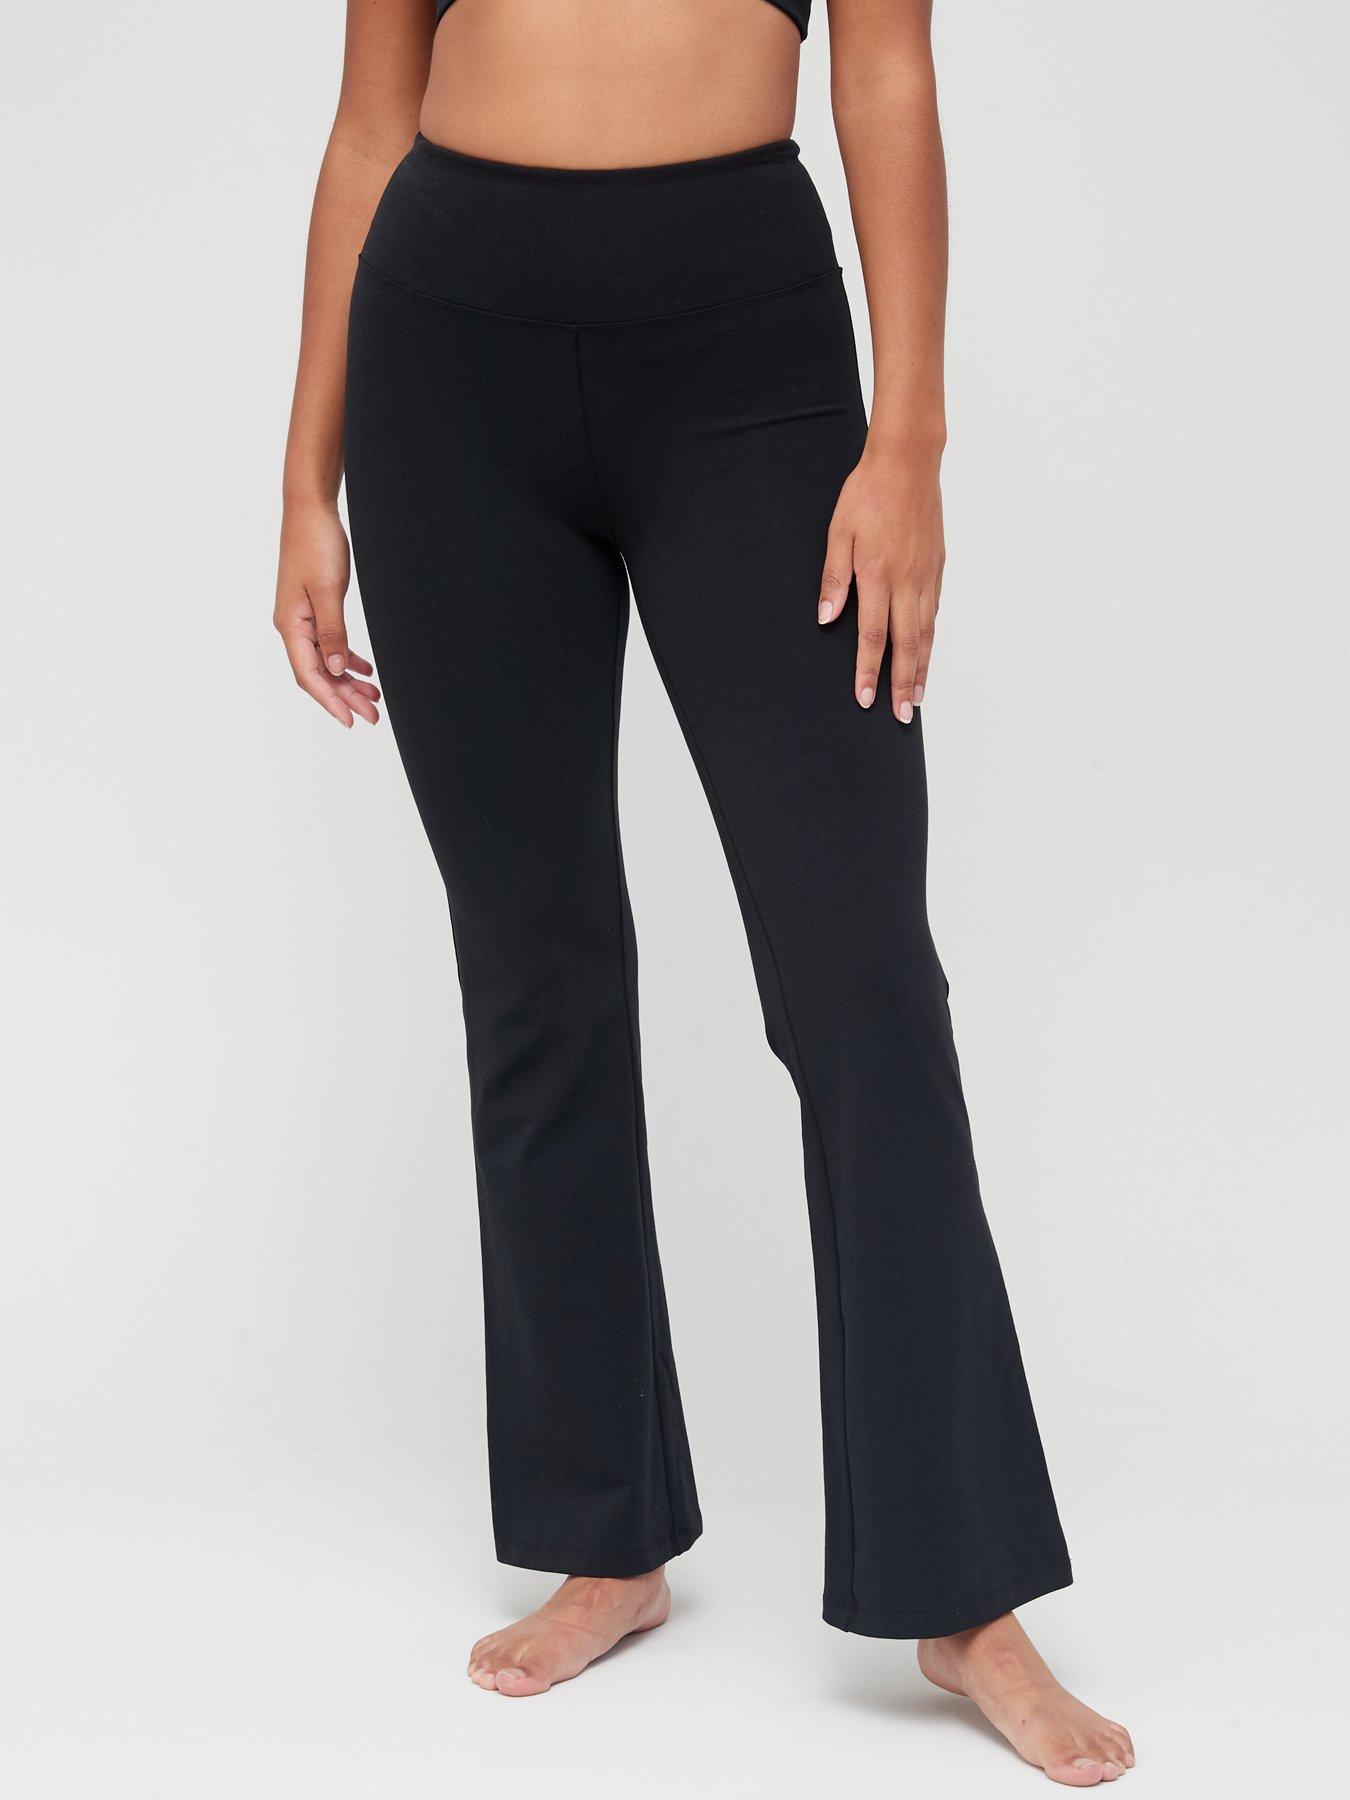 Charcoal Grey Soft Touch Flare Pant